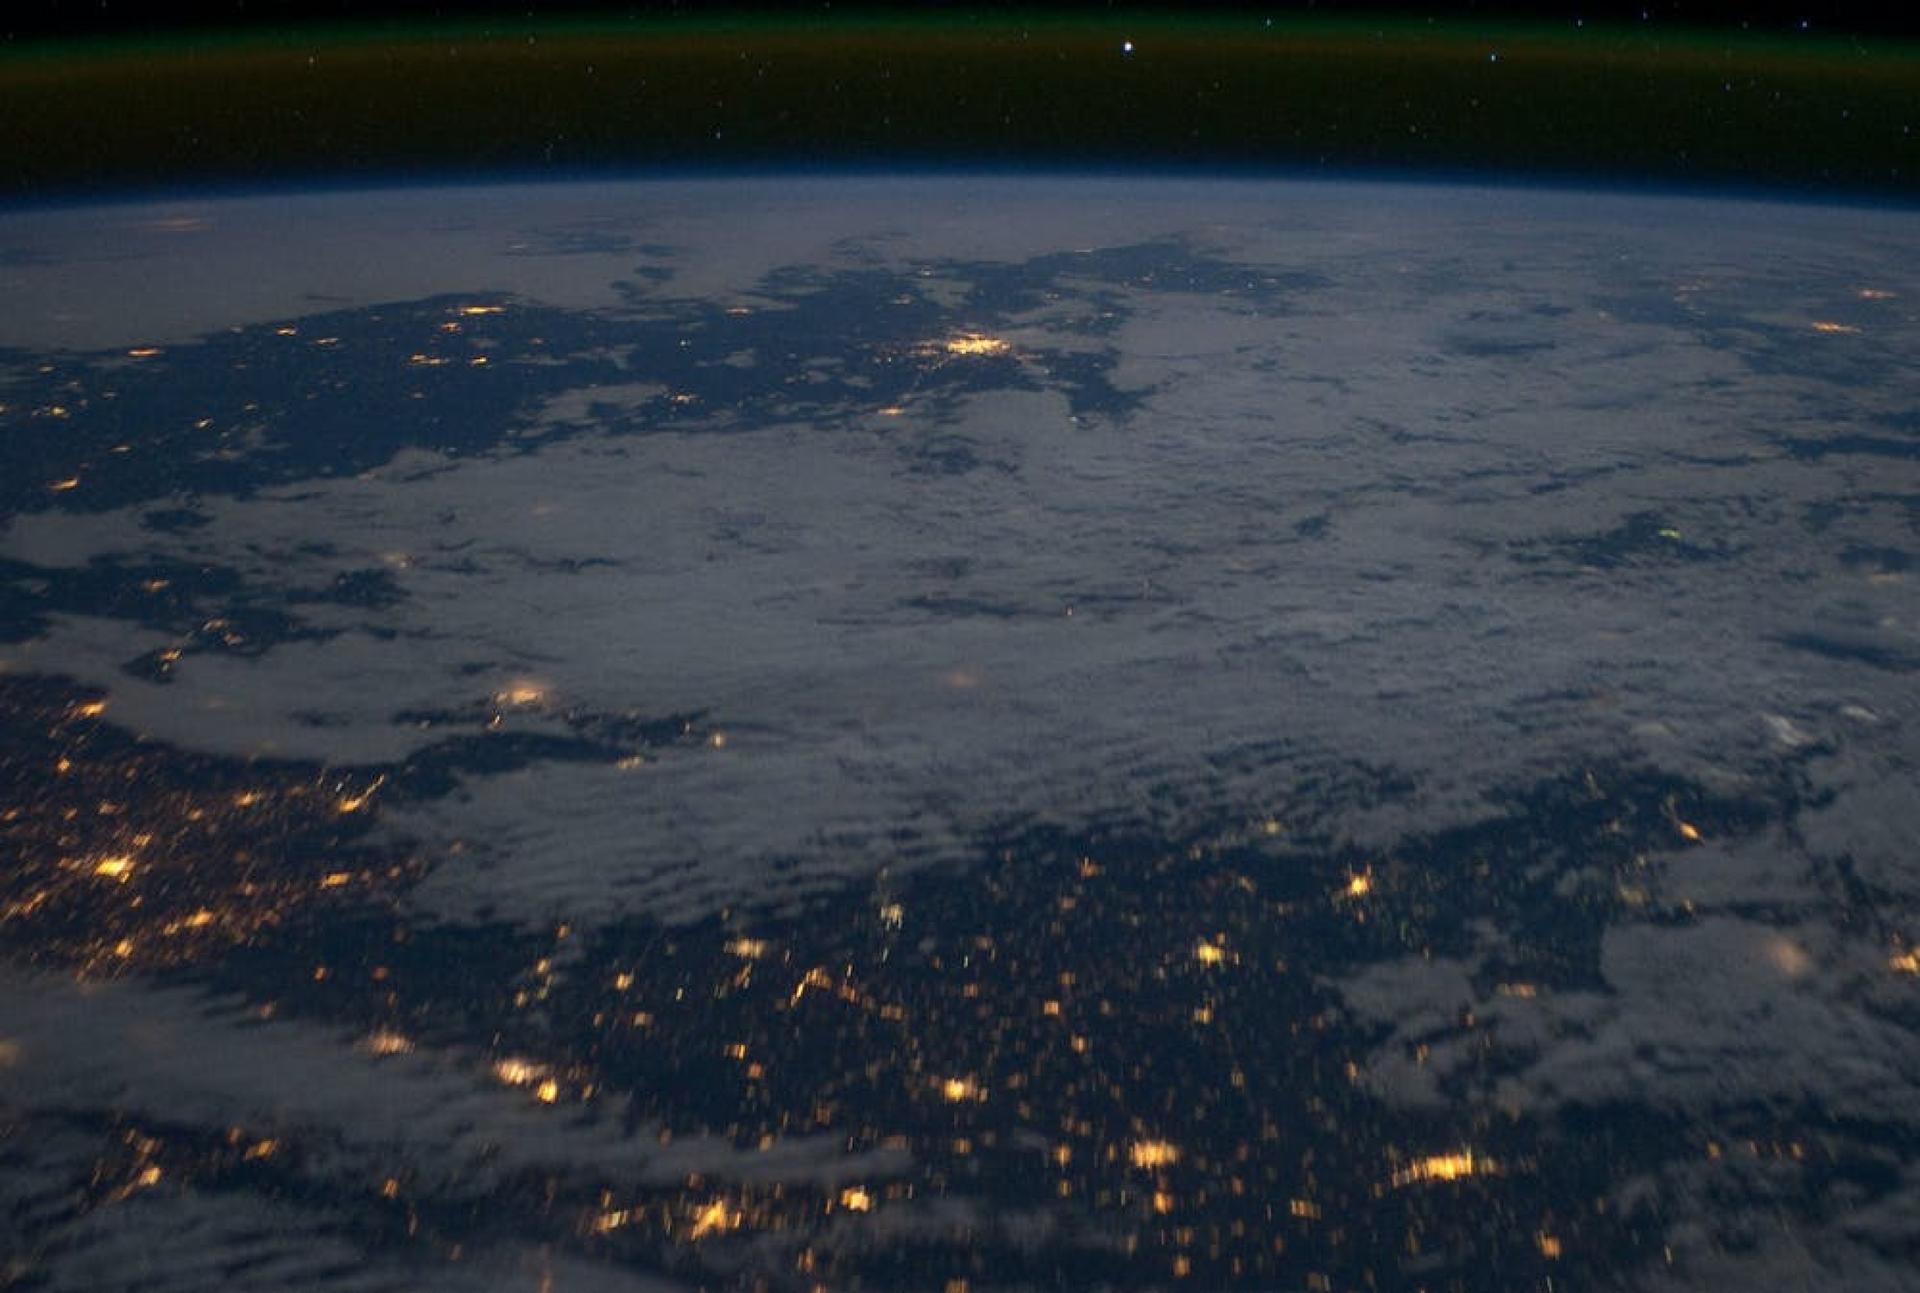 Ukraine by night from a satellite, showing lights in large cities